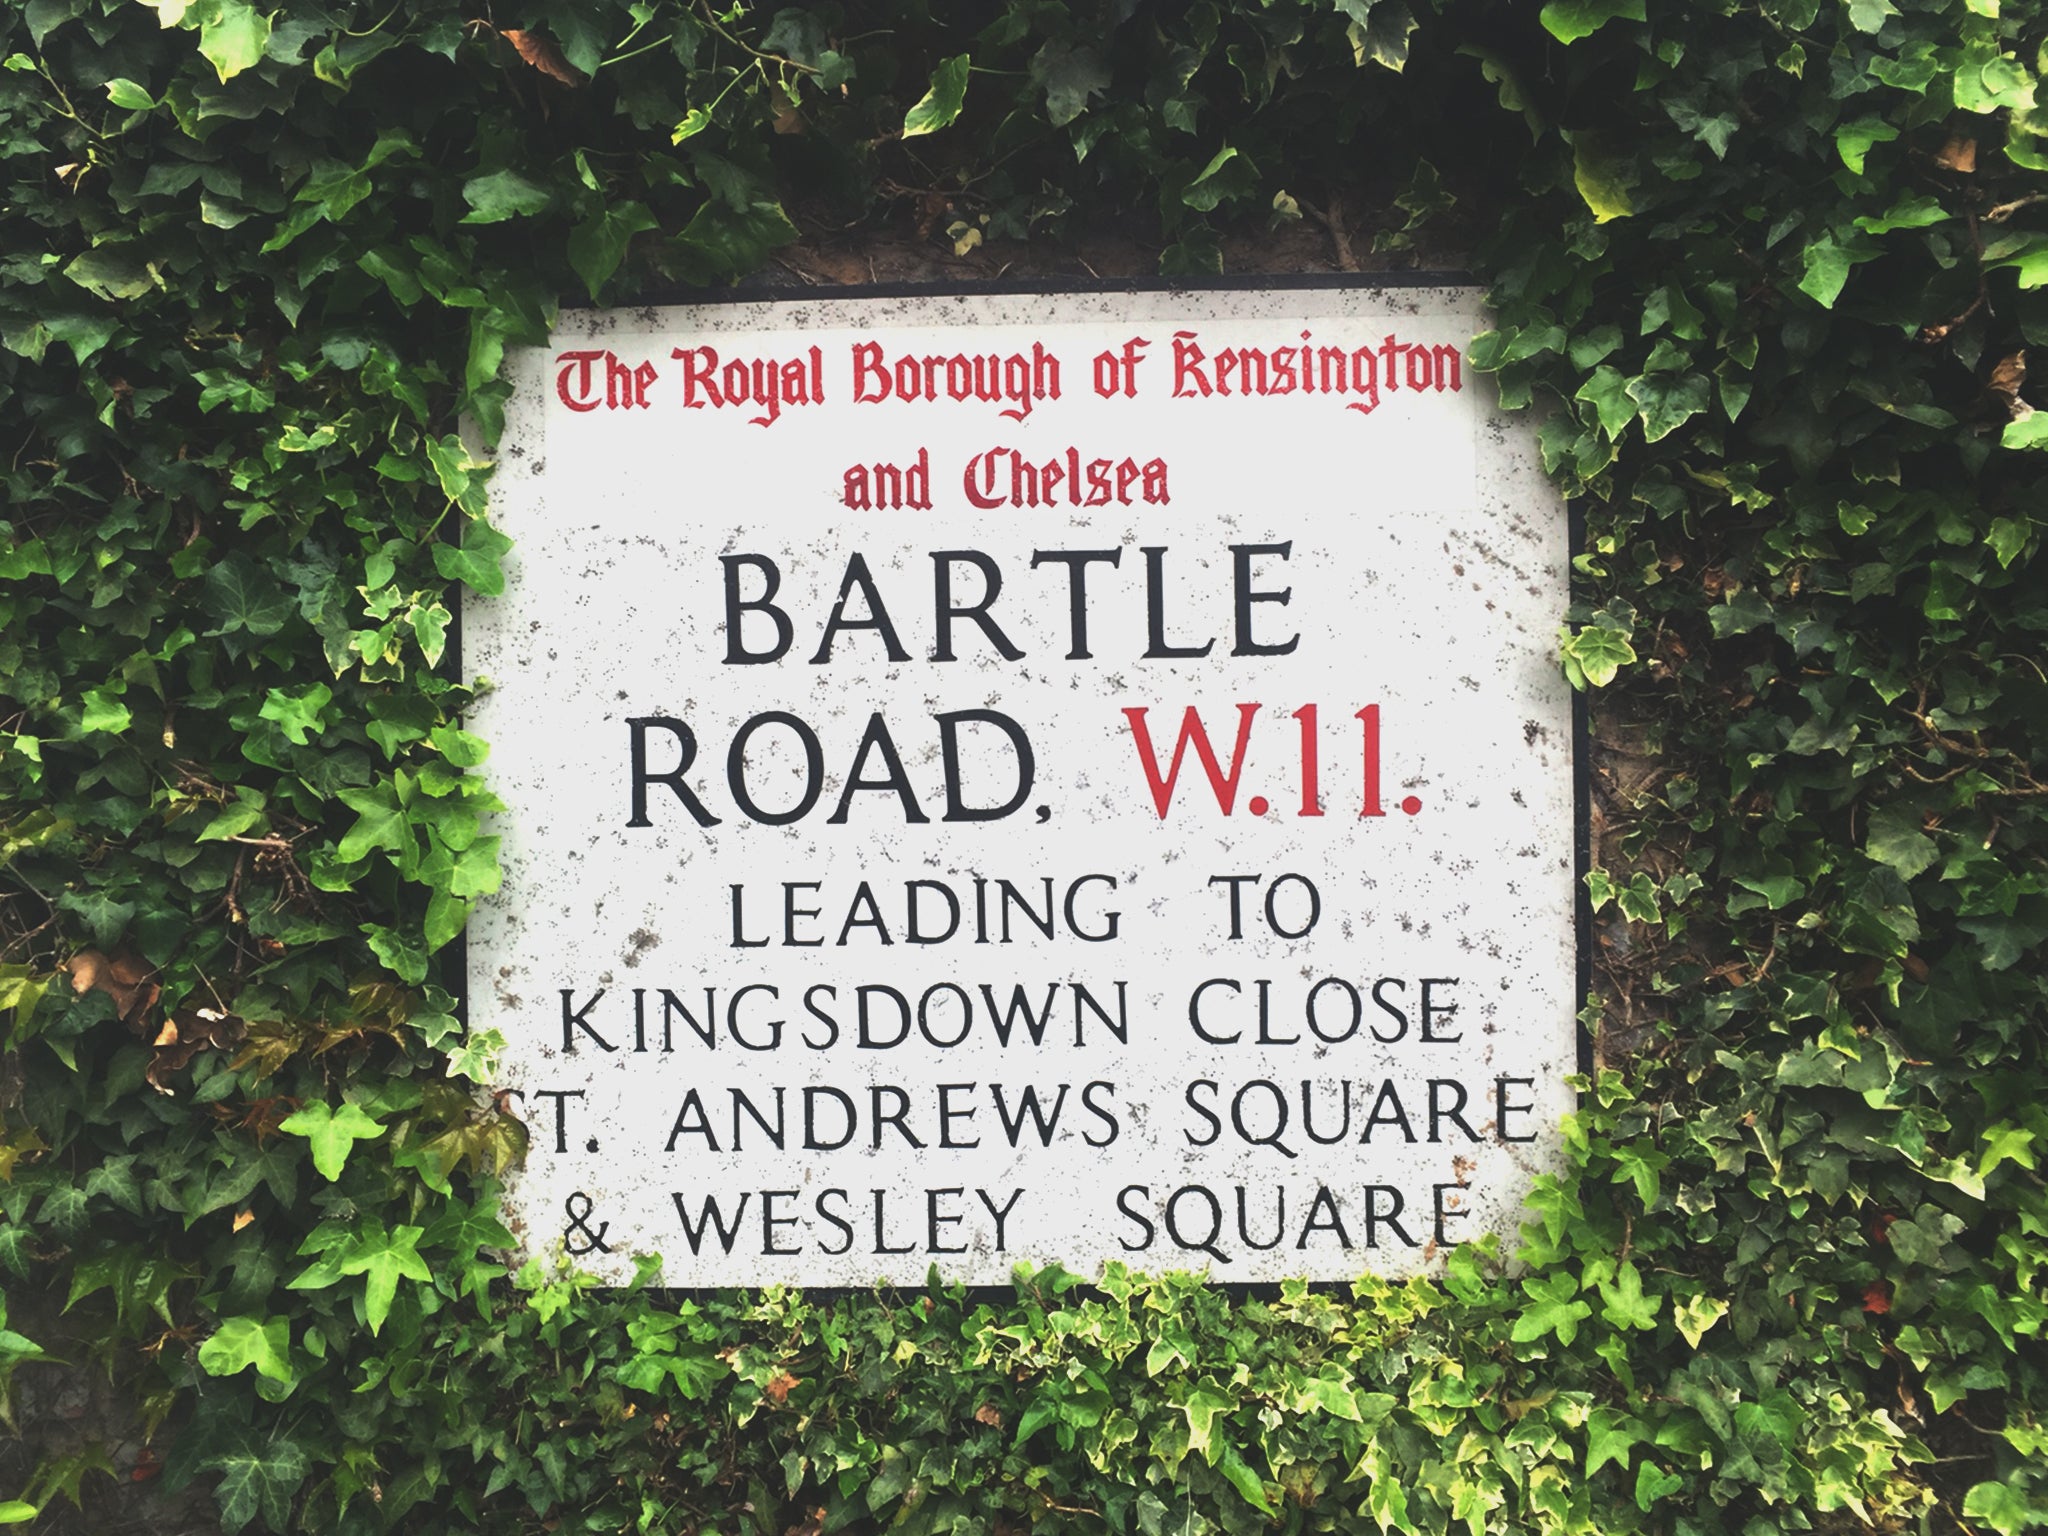 Bartle Road in Notting Hill, which was built after Rillington Place was demolished